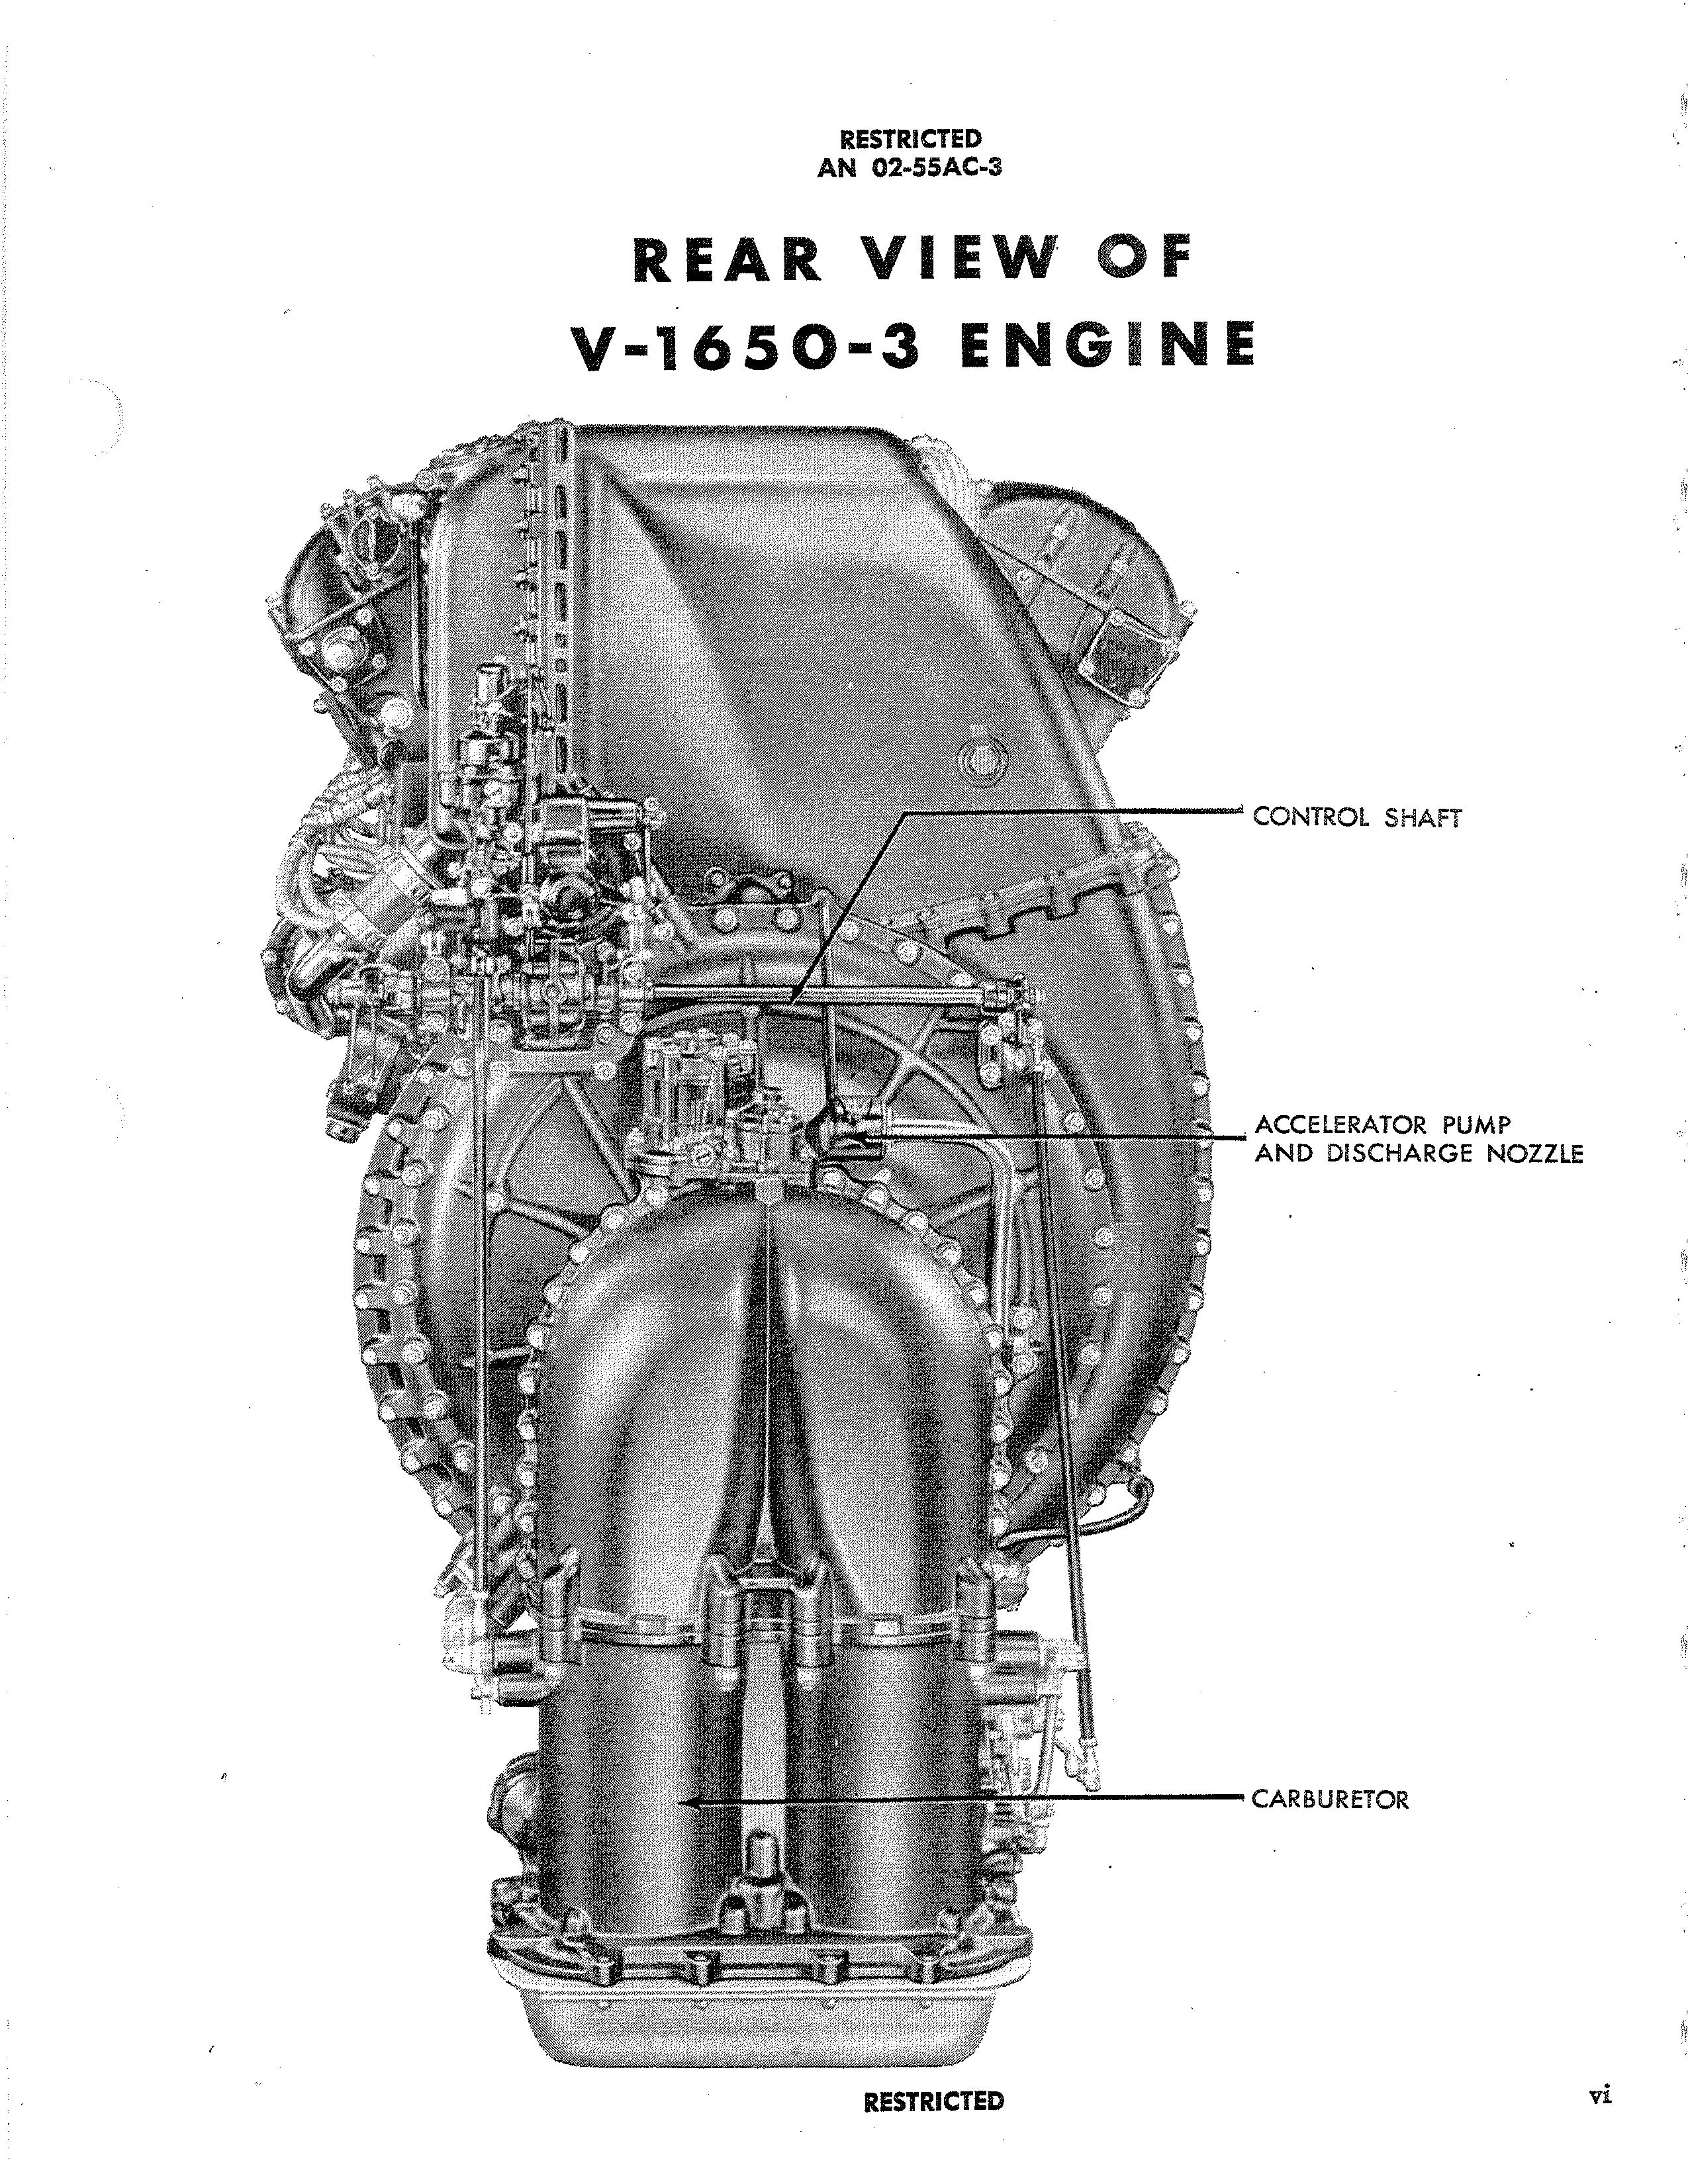 Sample page 9 from AirCorps Library document: Overhaul Instructions for V-1650-3, -7, and Merlin 68 and 69 Engines